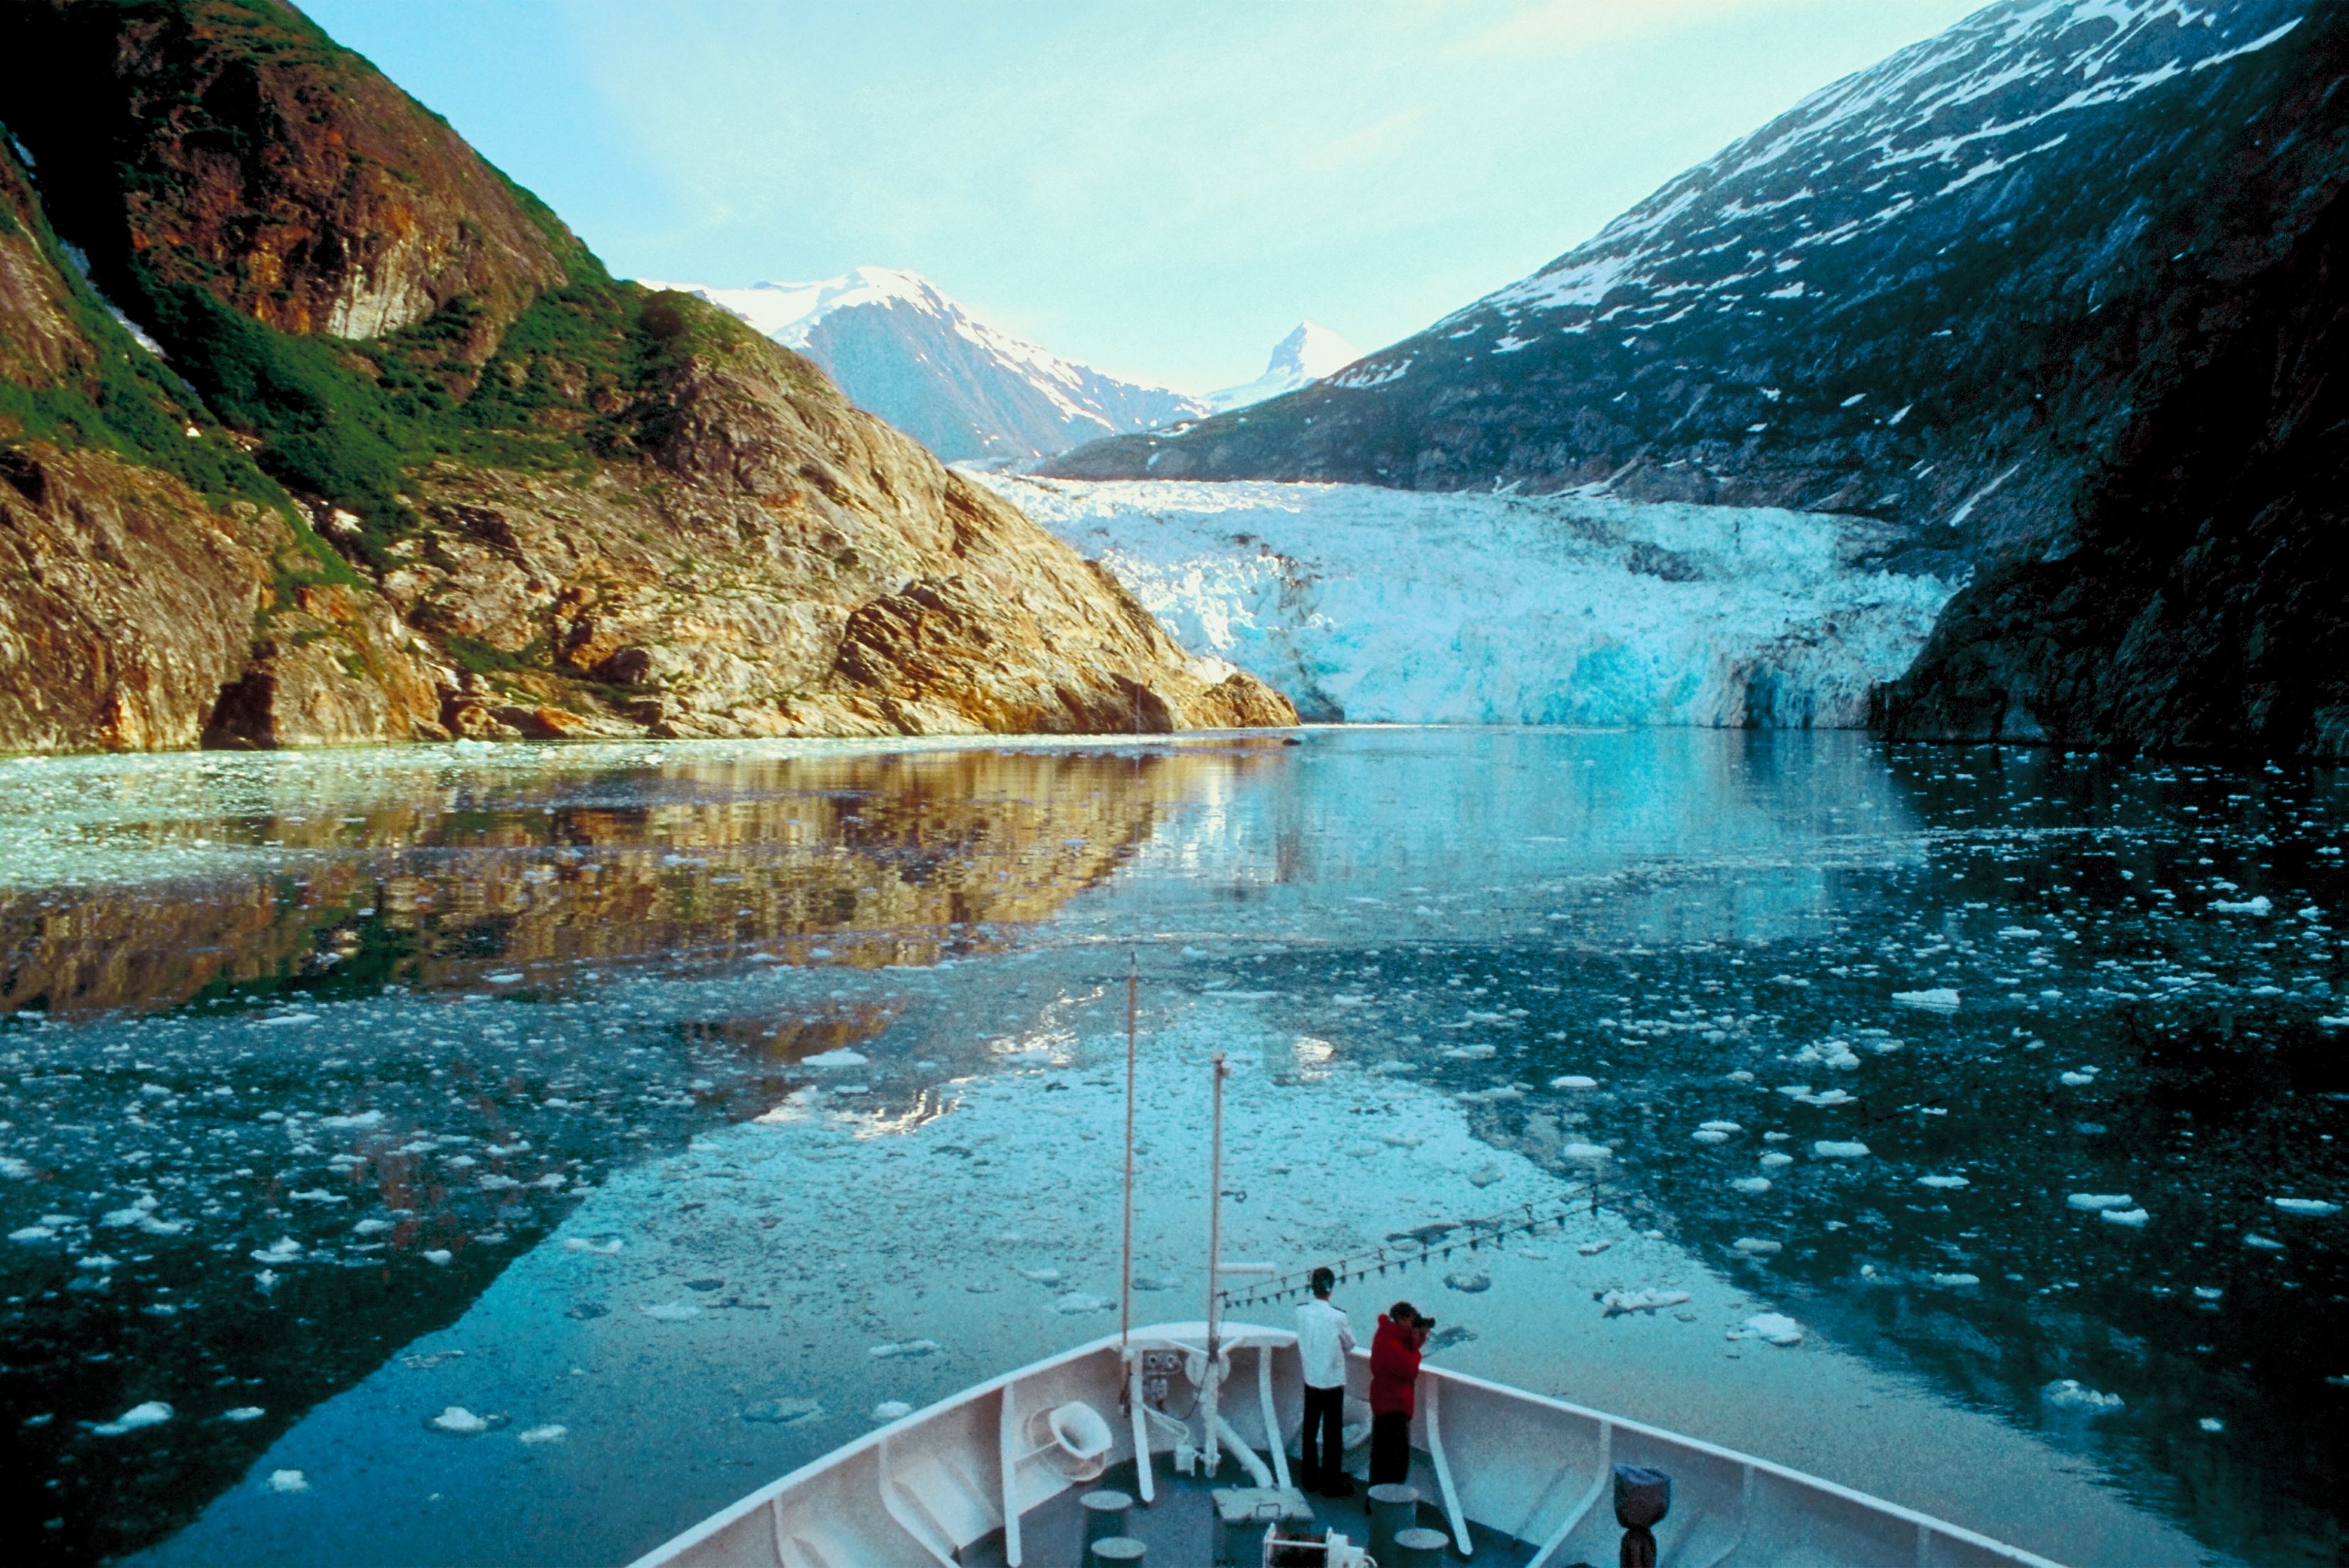 From port to starboard on an Alaskan adventure